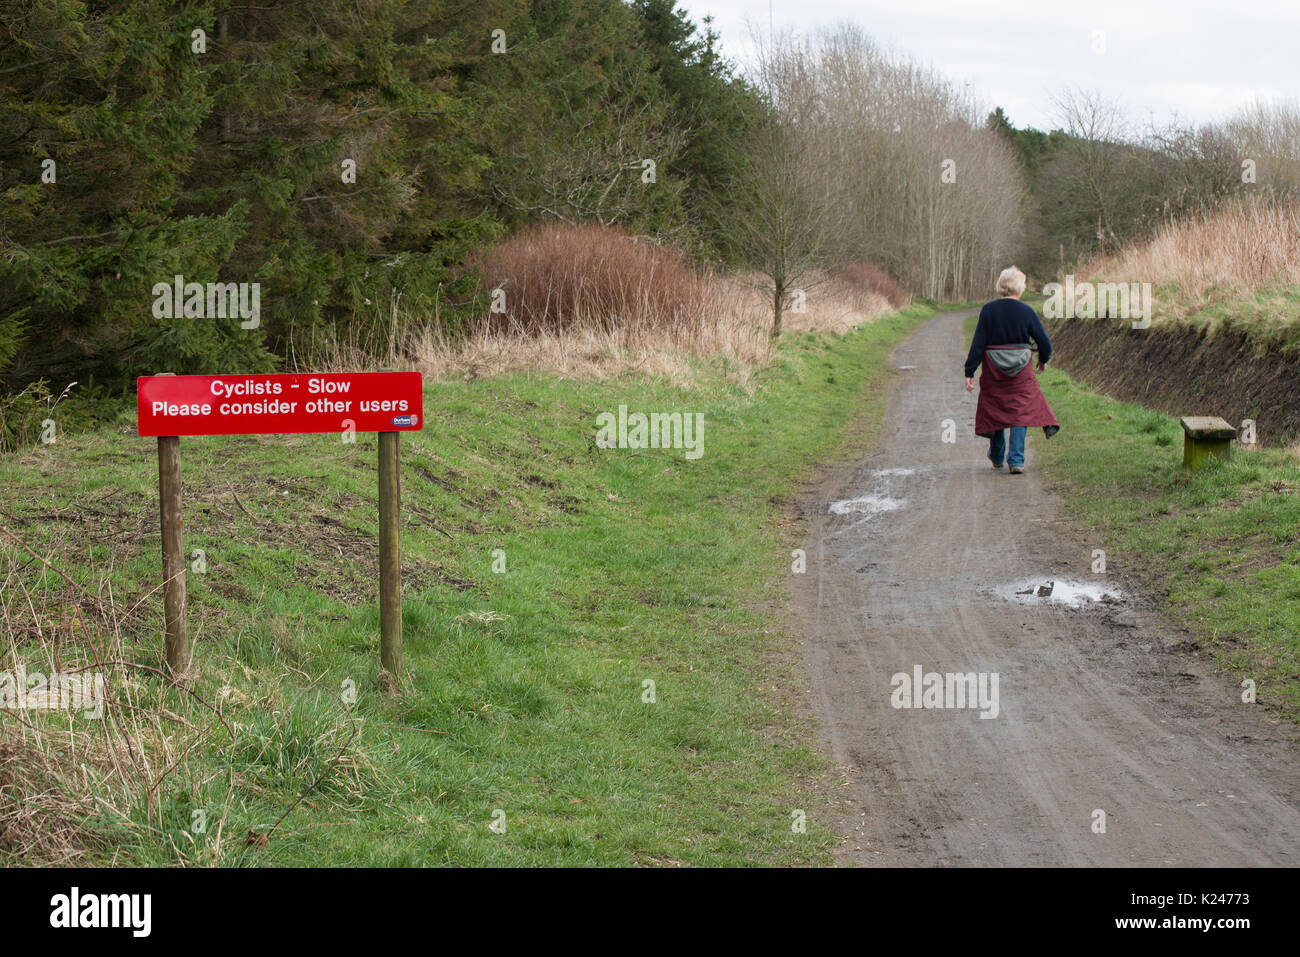 Public path in countryside showing lone walker and notice with request to cyclists to consider other path users Stock Photo